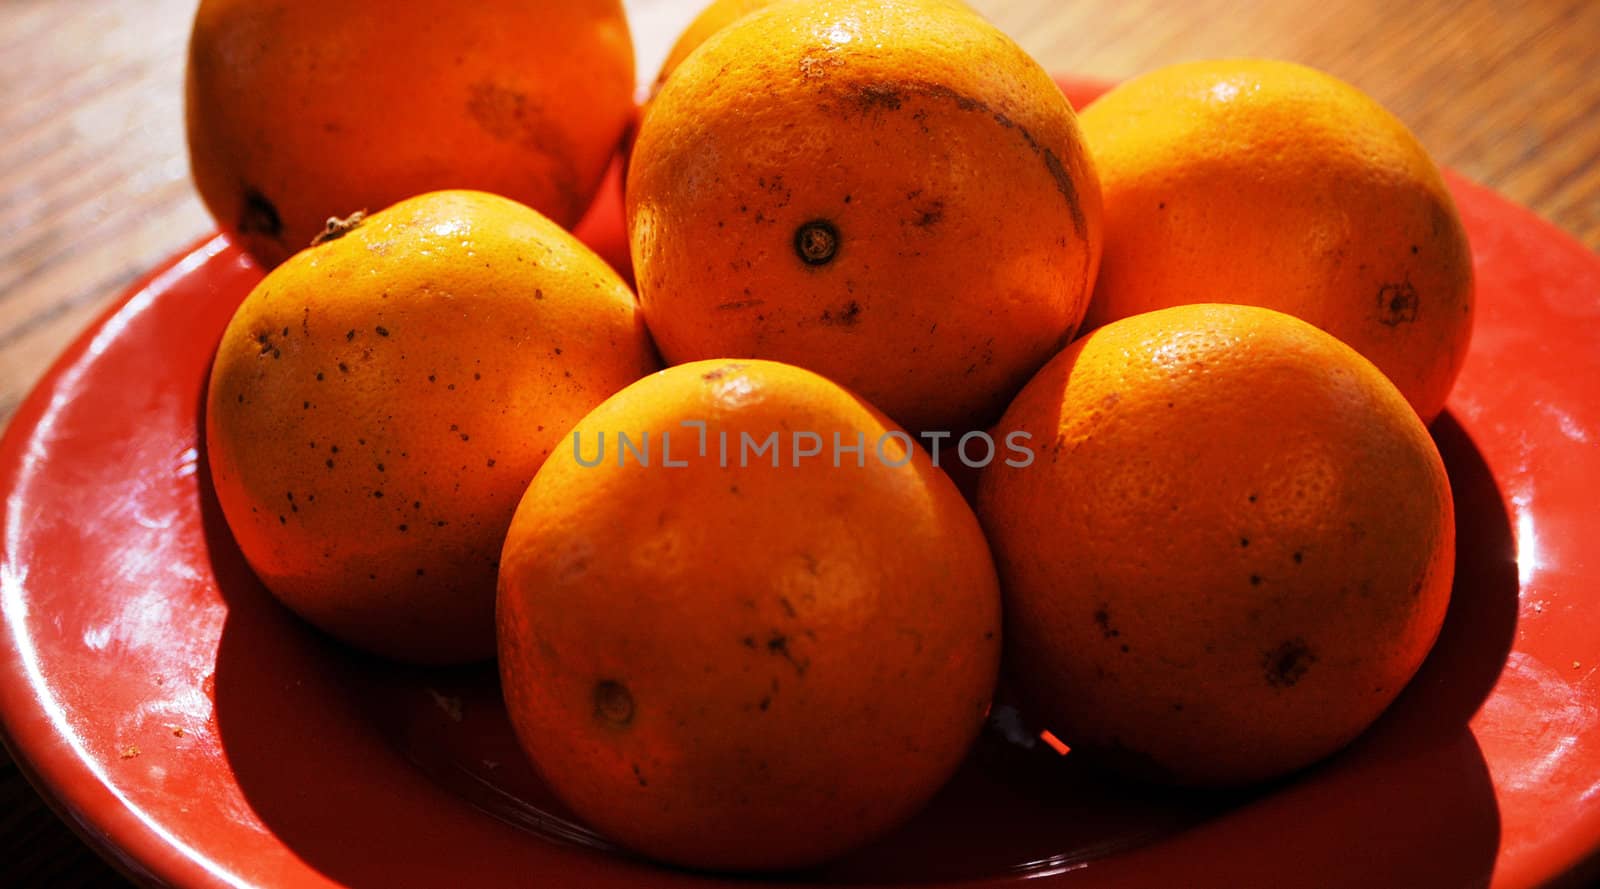 Oranges on a table